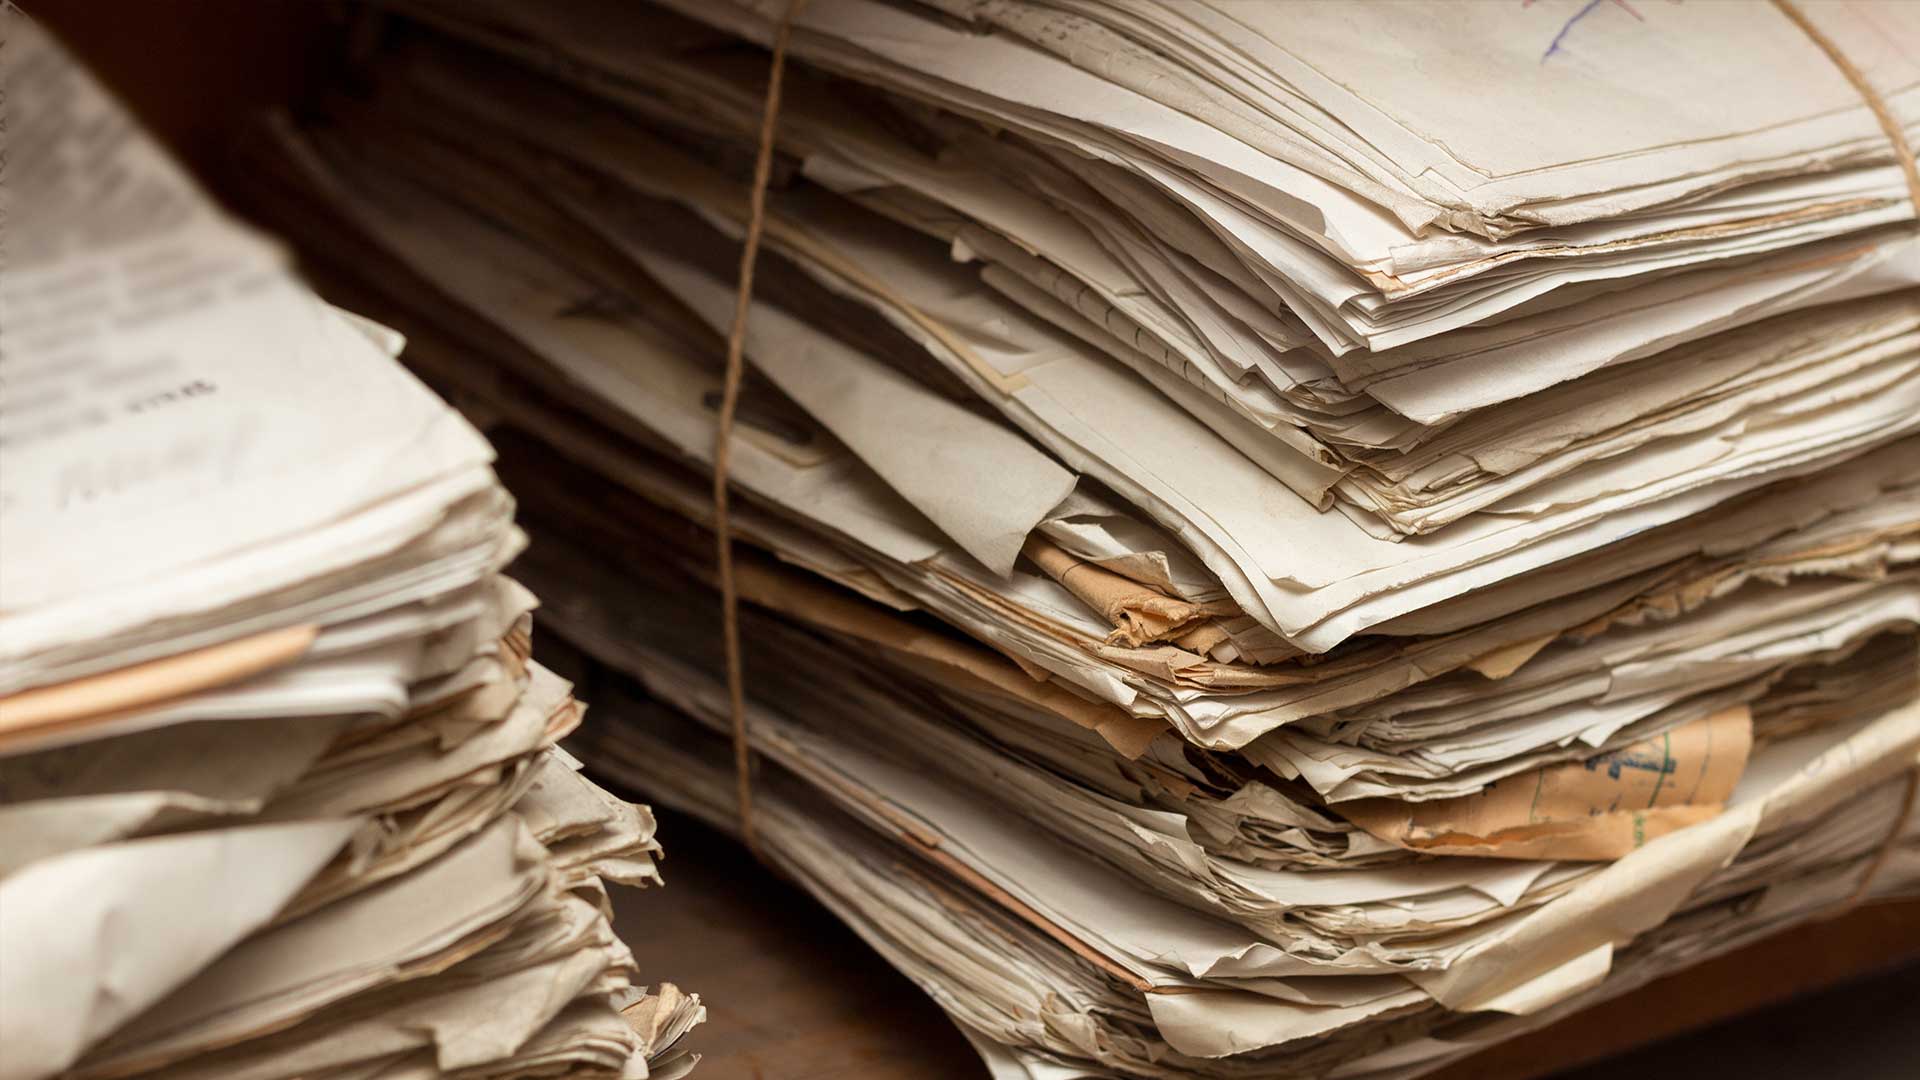 Document Scanning for State and County Government Records